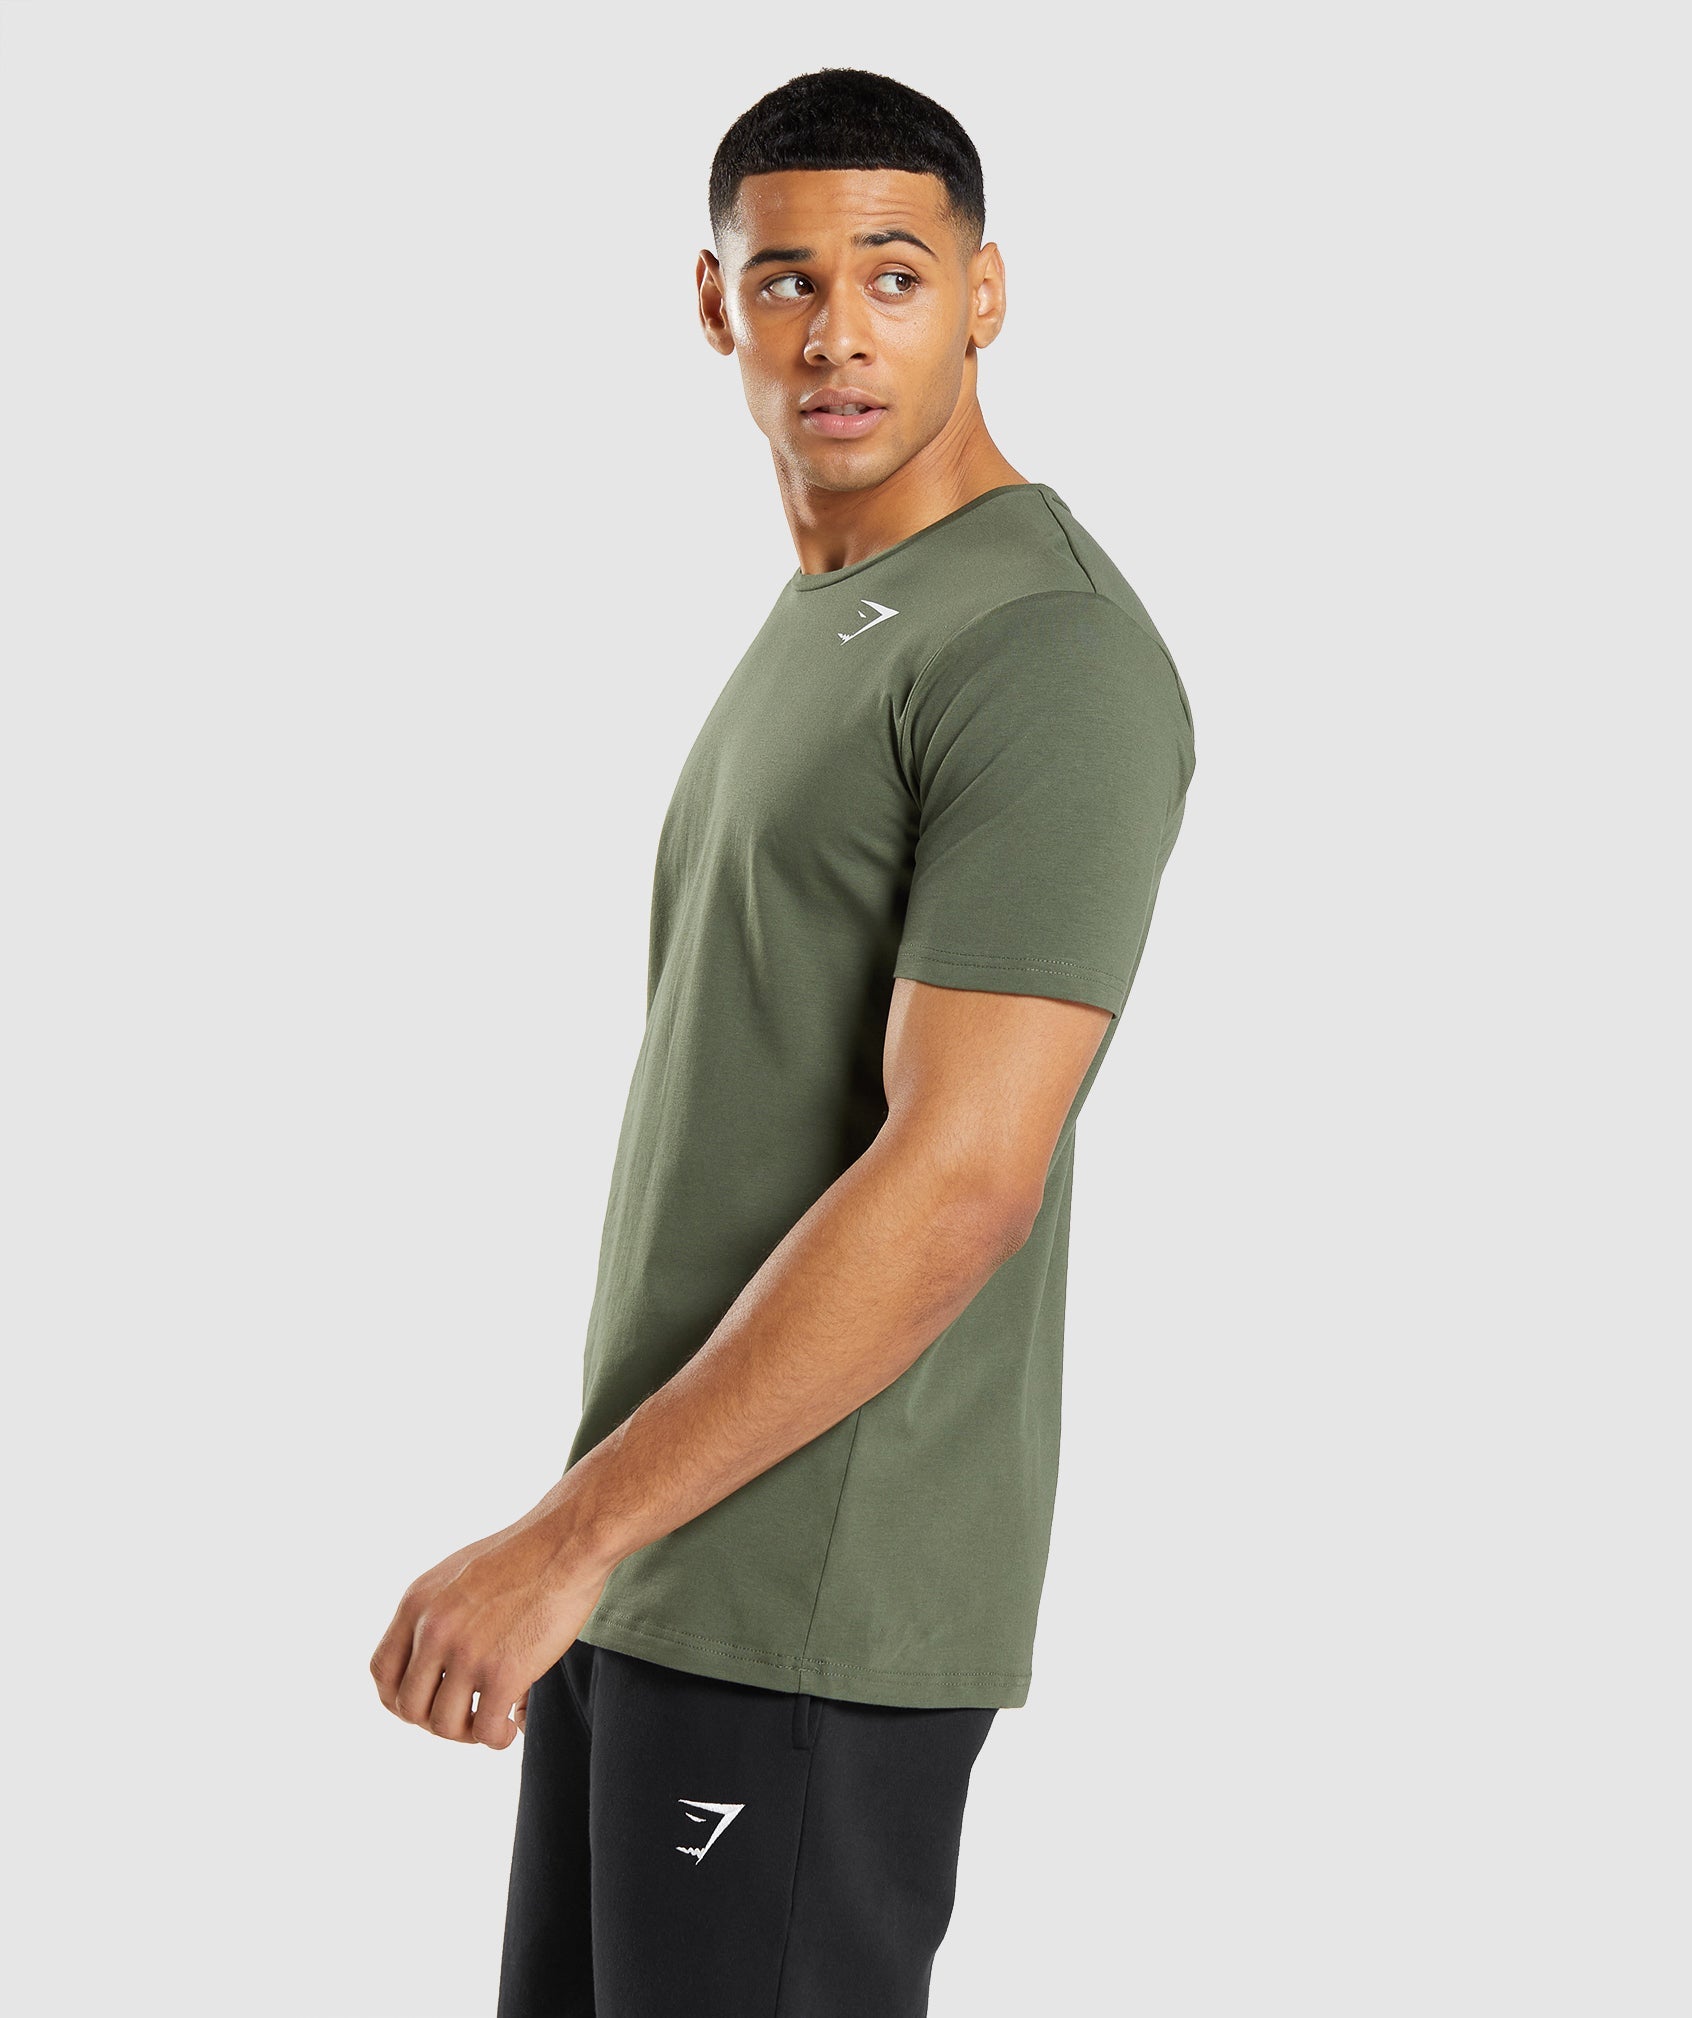 Essential T-Shirt in Core Olive